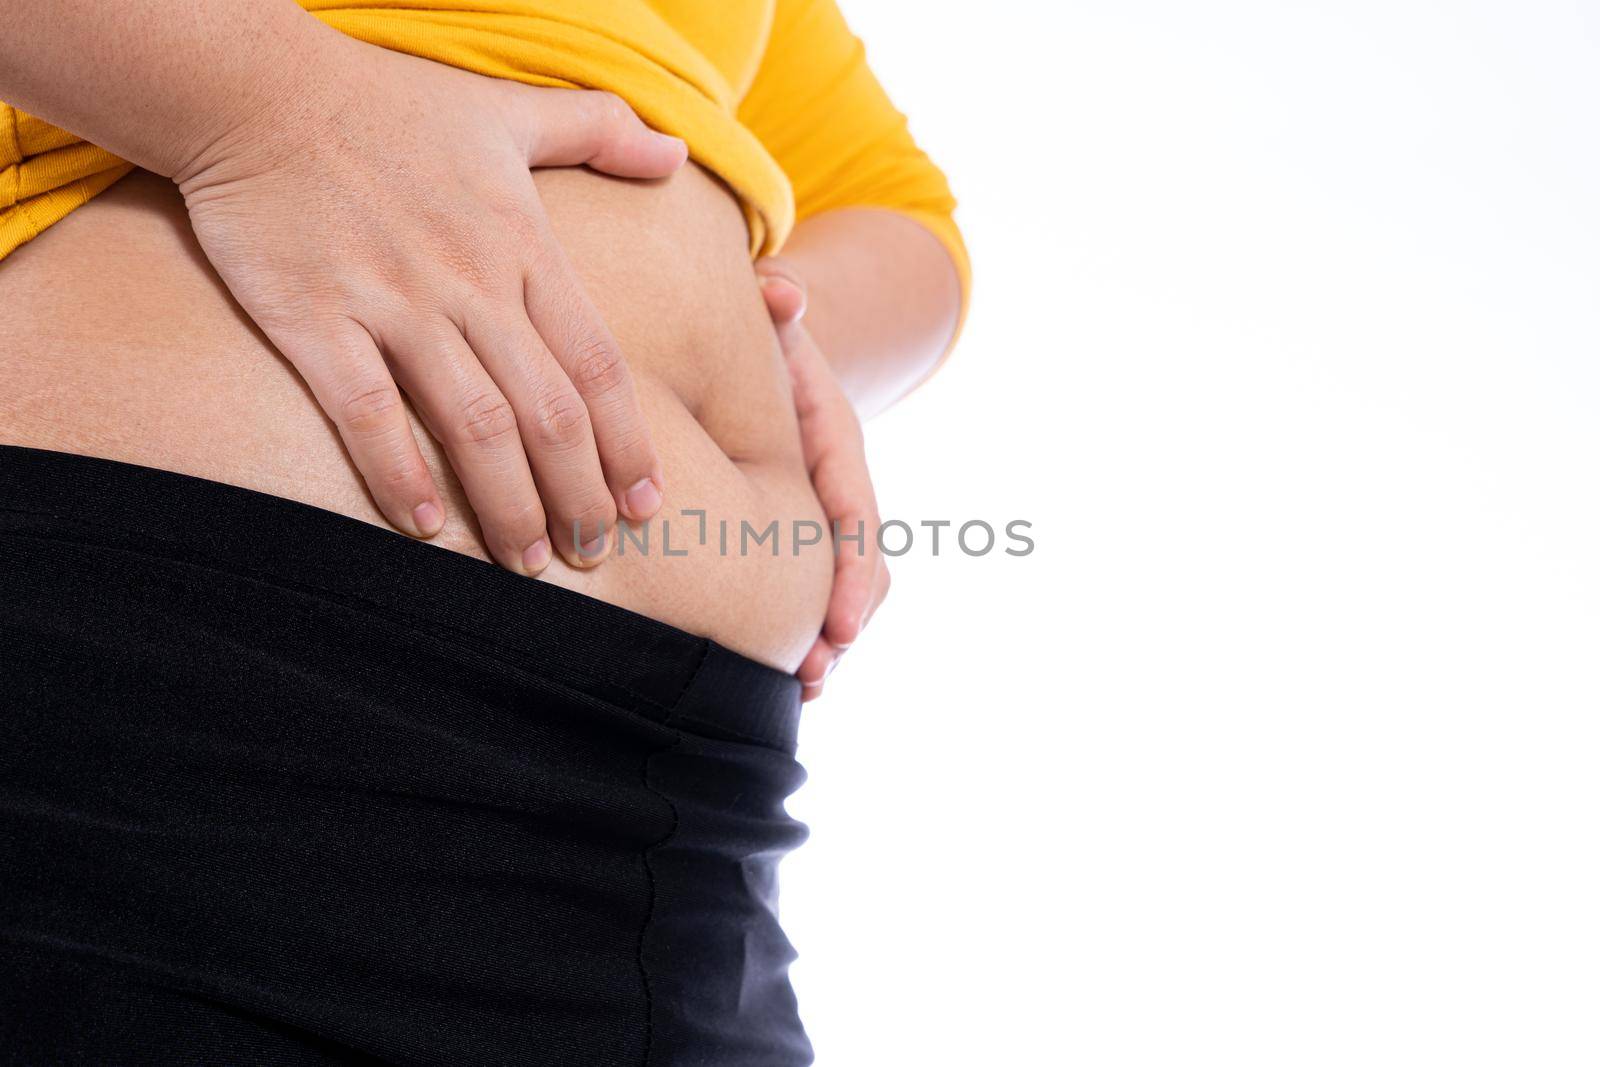 Fat woman holding excessive fat belly, overweight fatty belly isolated white background. Diet lifestyle, weight loss, stomach muscle, healthy concept.